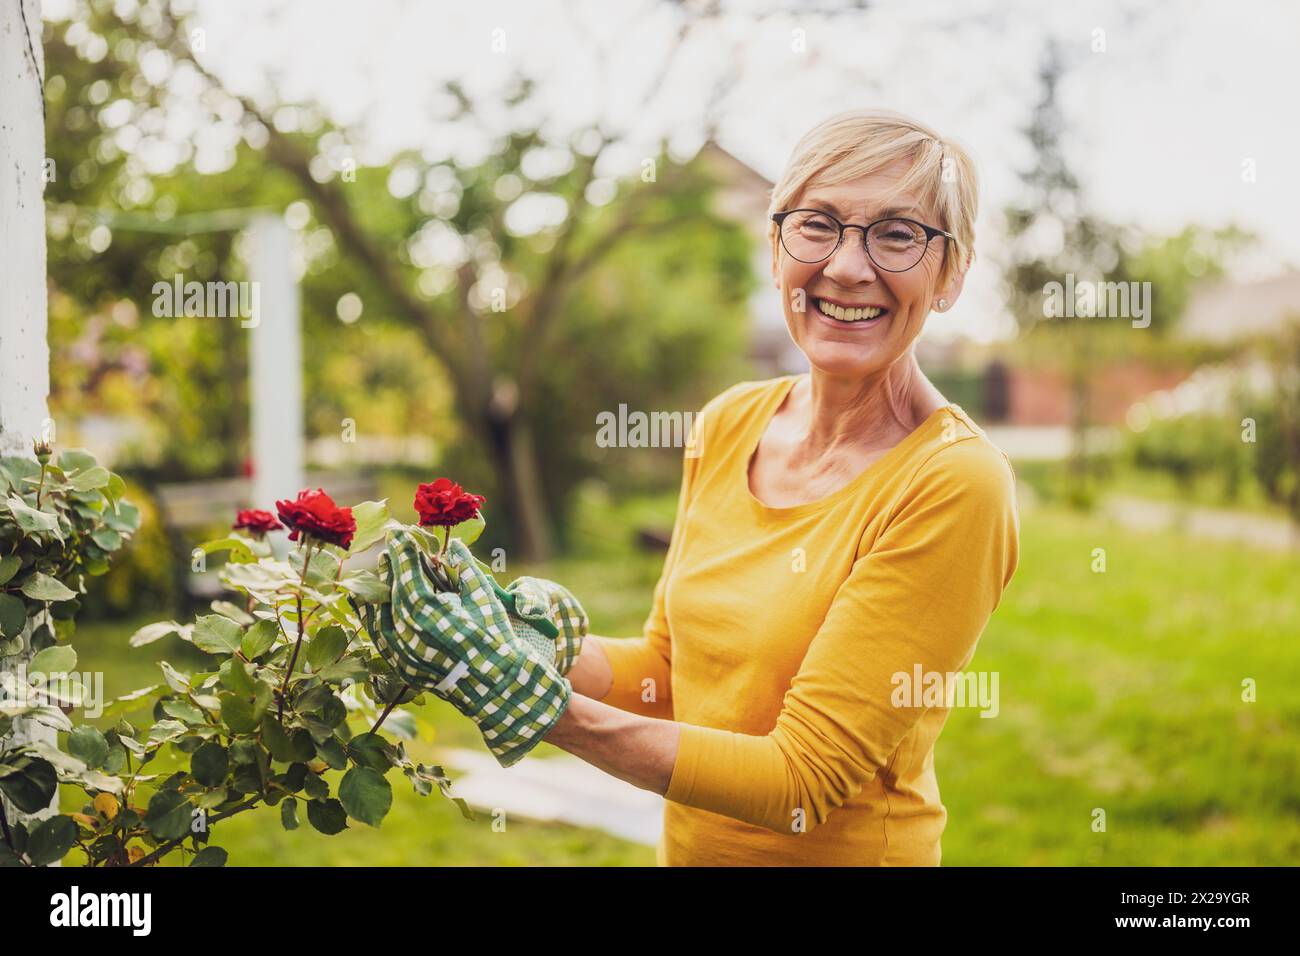 Portrait of happy senior woman gardening. She is pruning flowers. Stock Photo